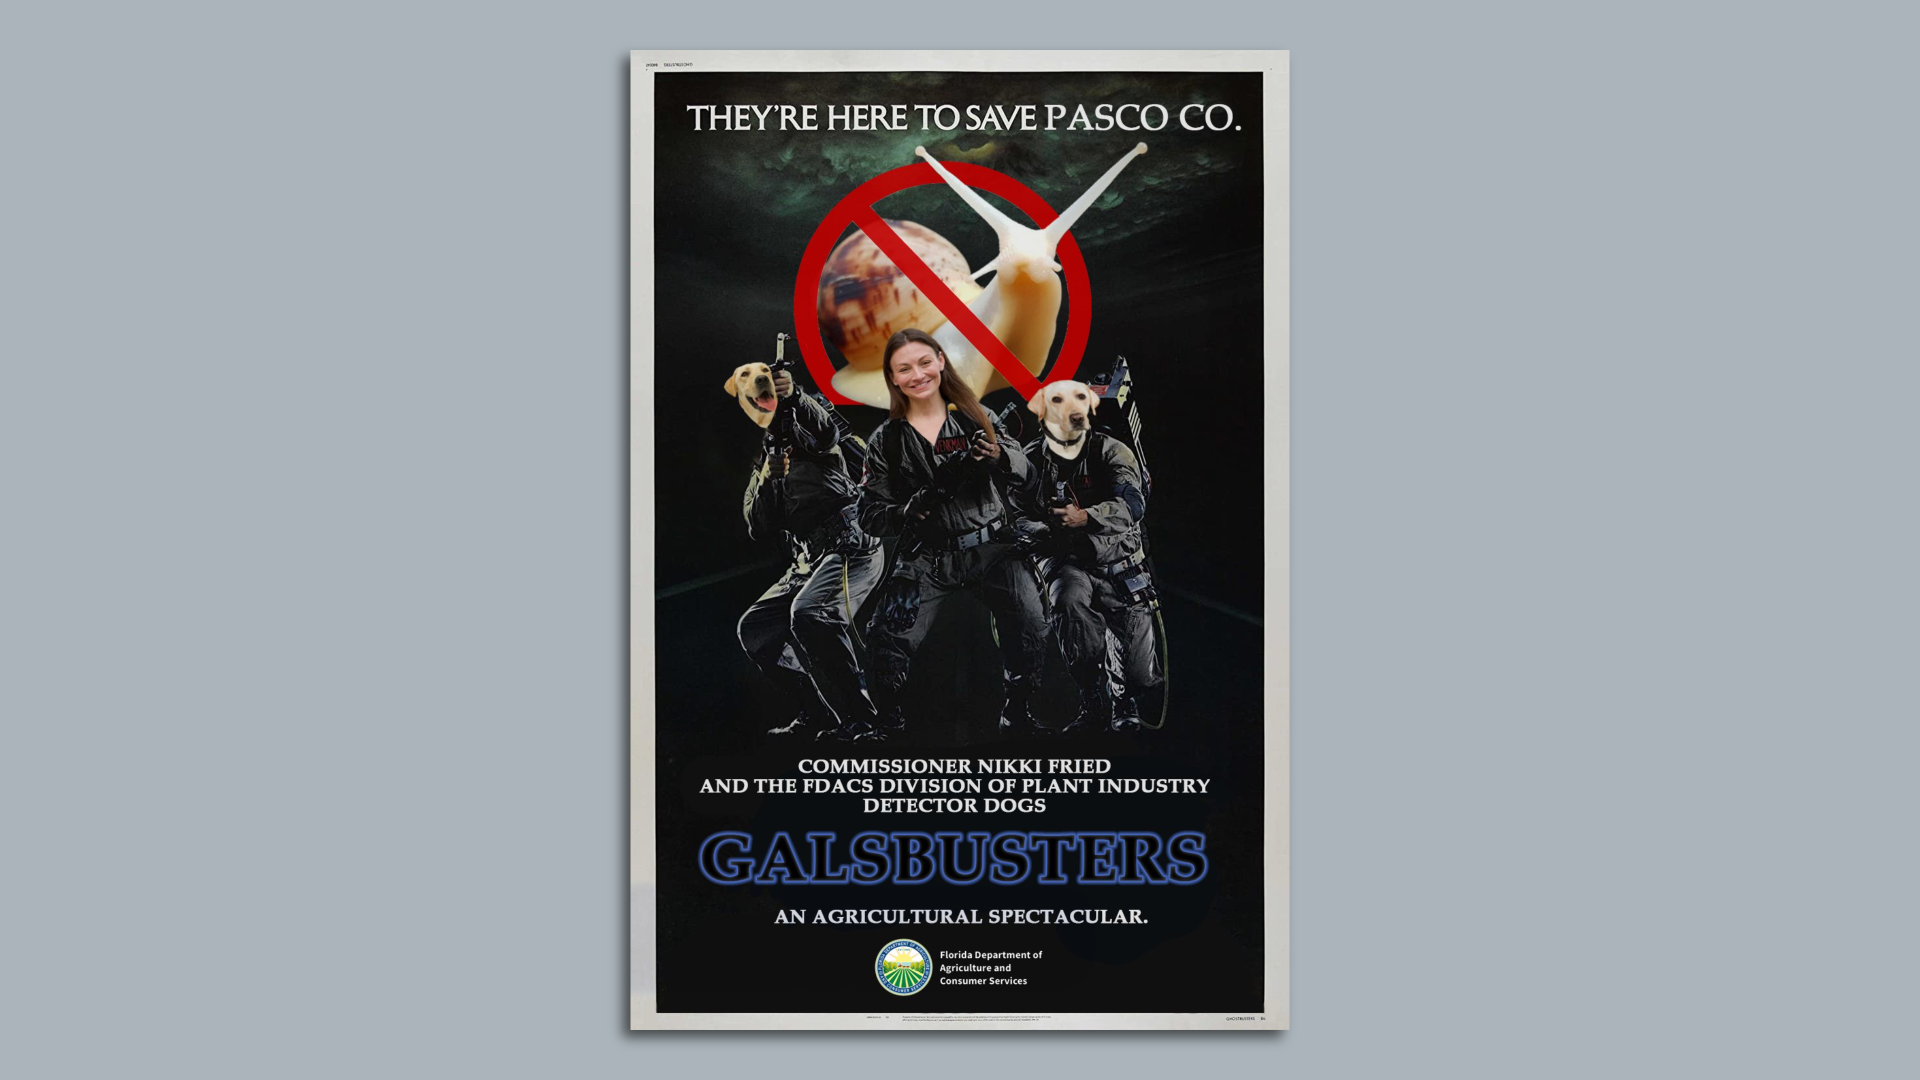 Nikki Fried photoshopped into the Ghostbuster's movie poster with the other two ghostbusters as dogs and the ghost as a snail”